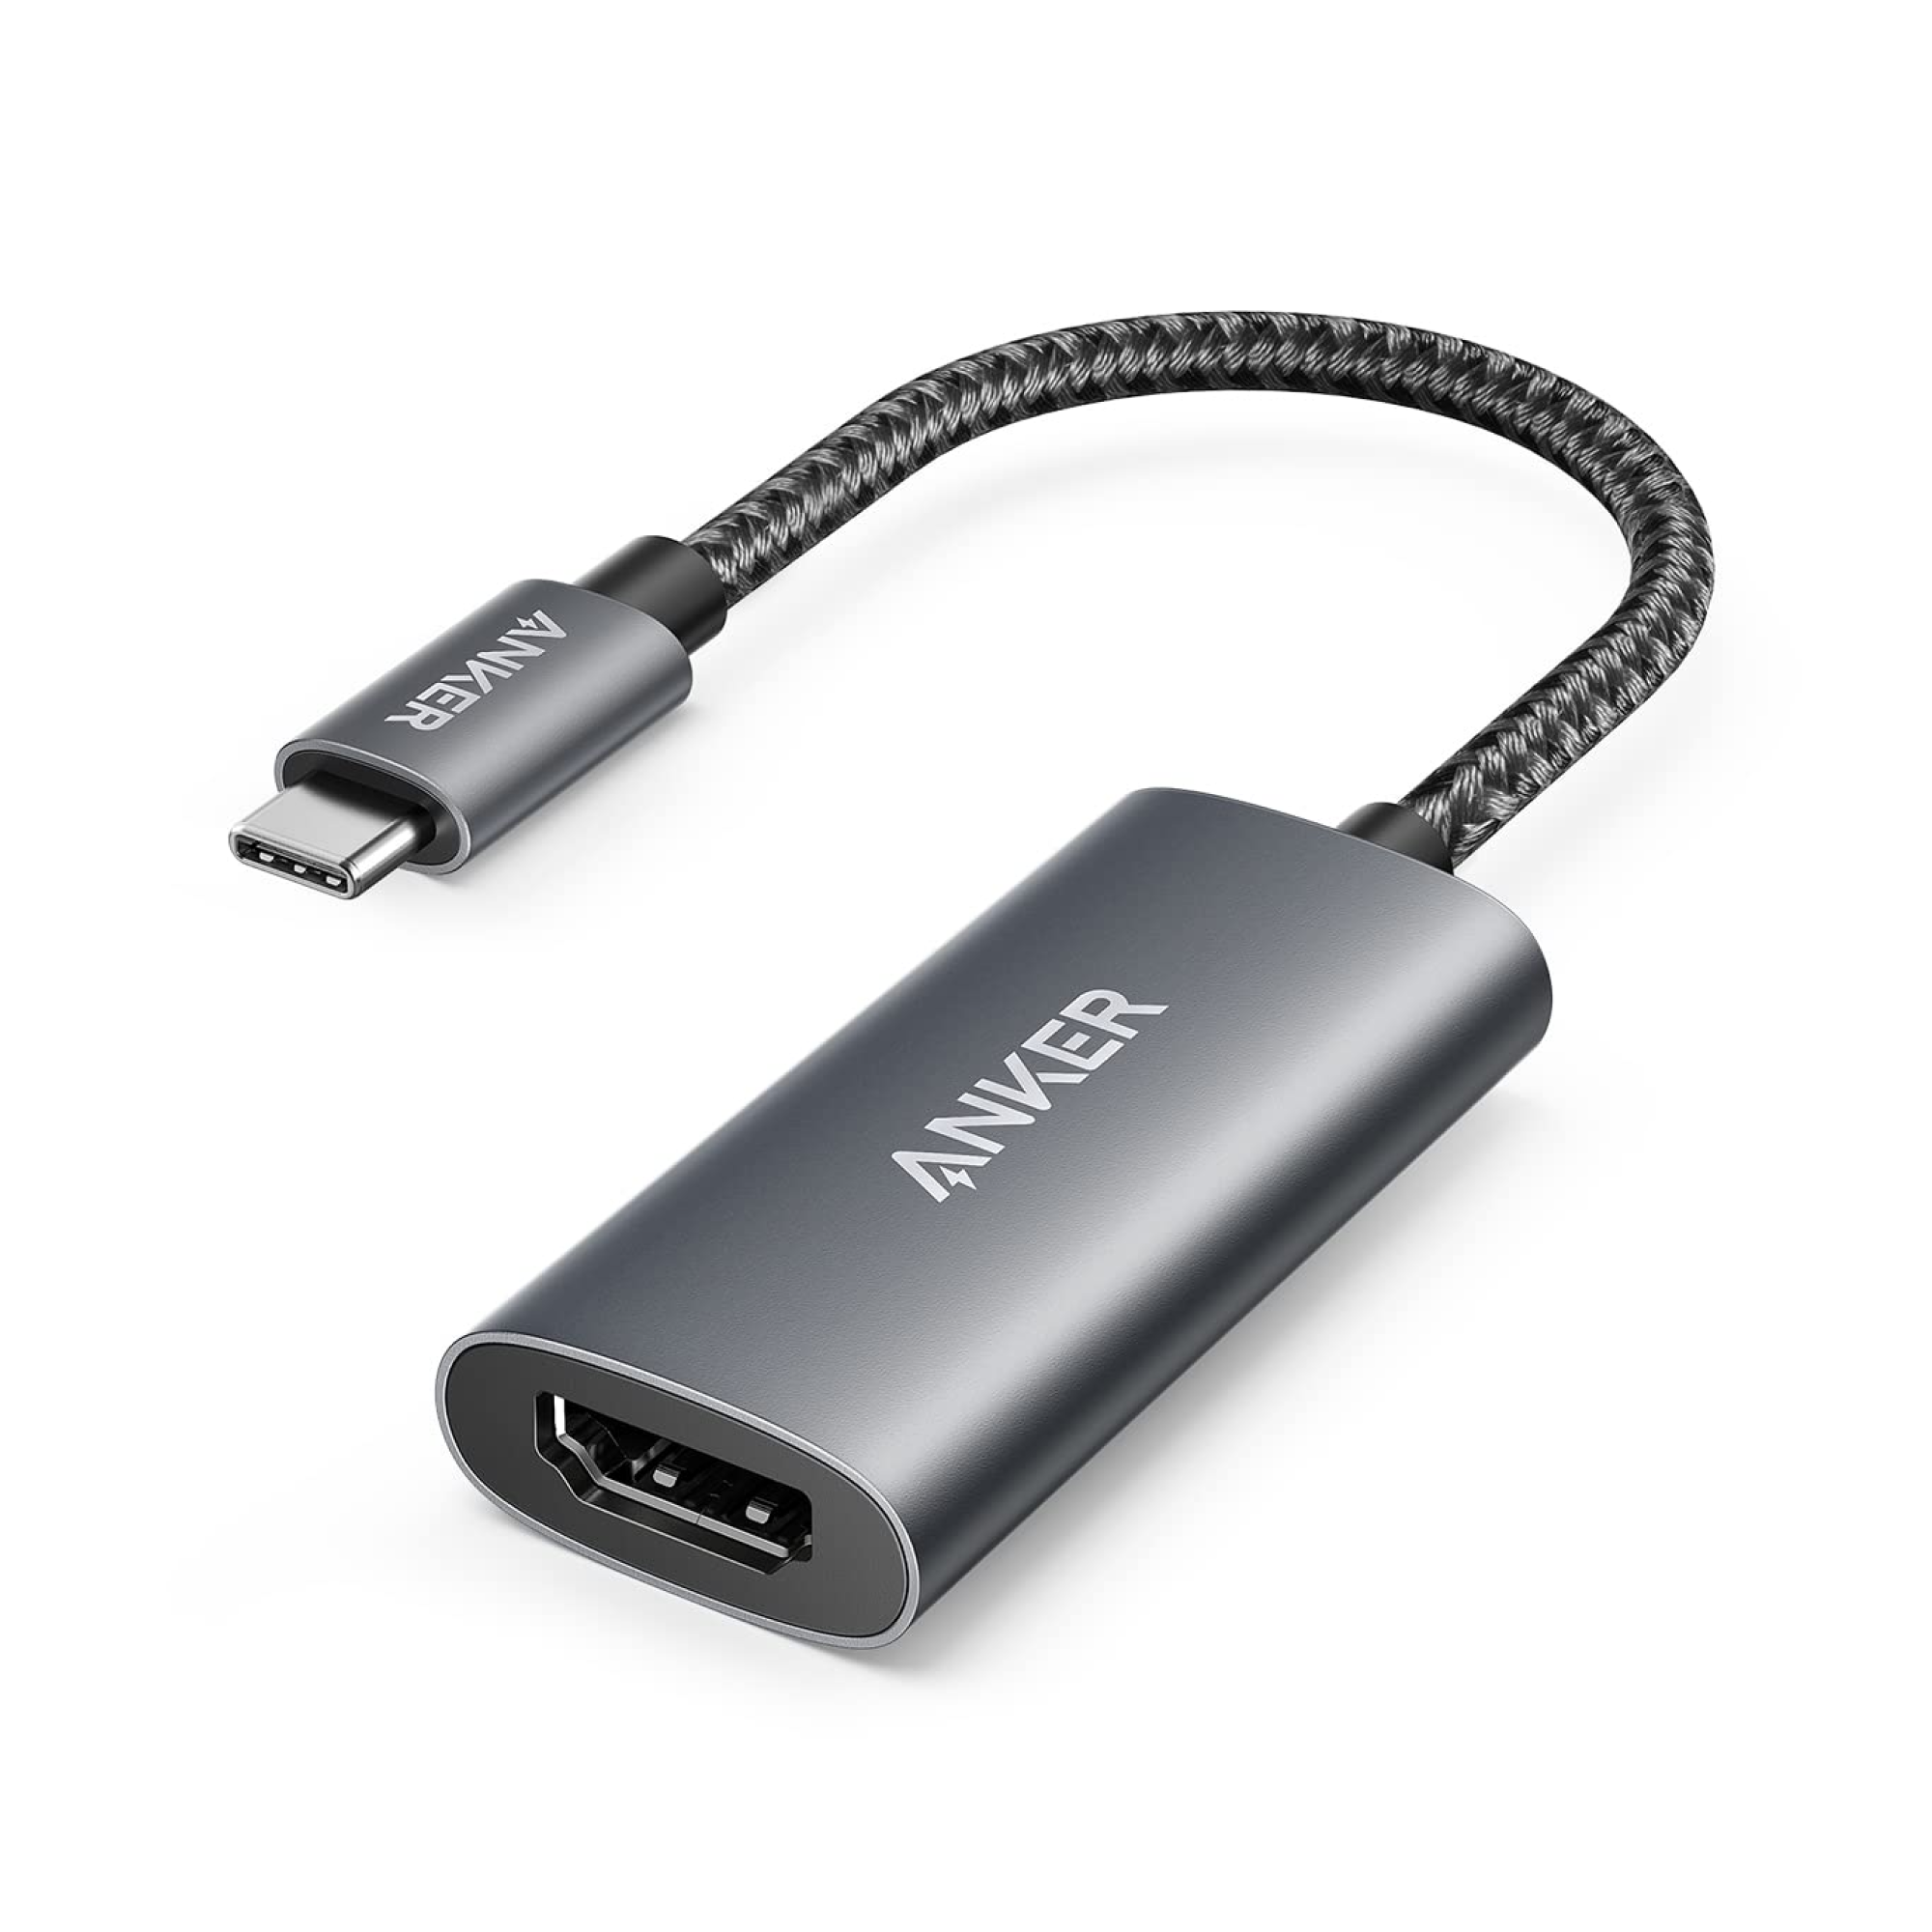 How to Connect a Mac to a TV with HDMI: A Step-by-Step Guide - Anker US